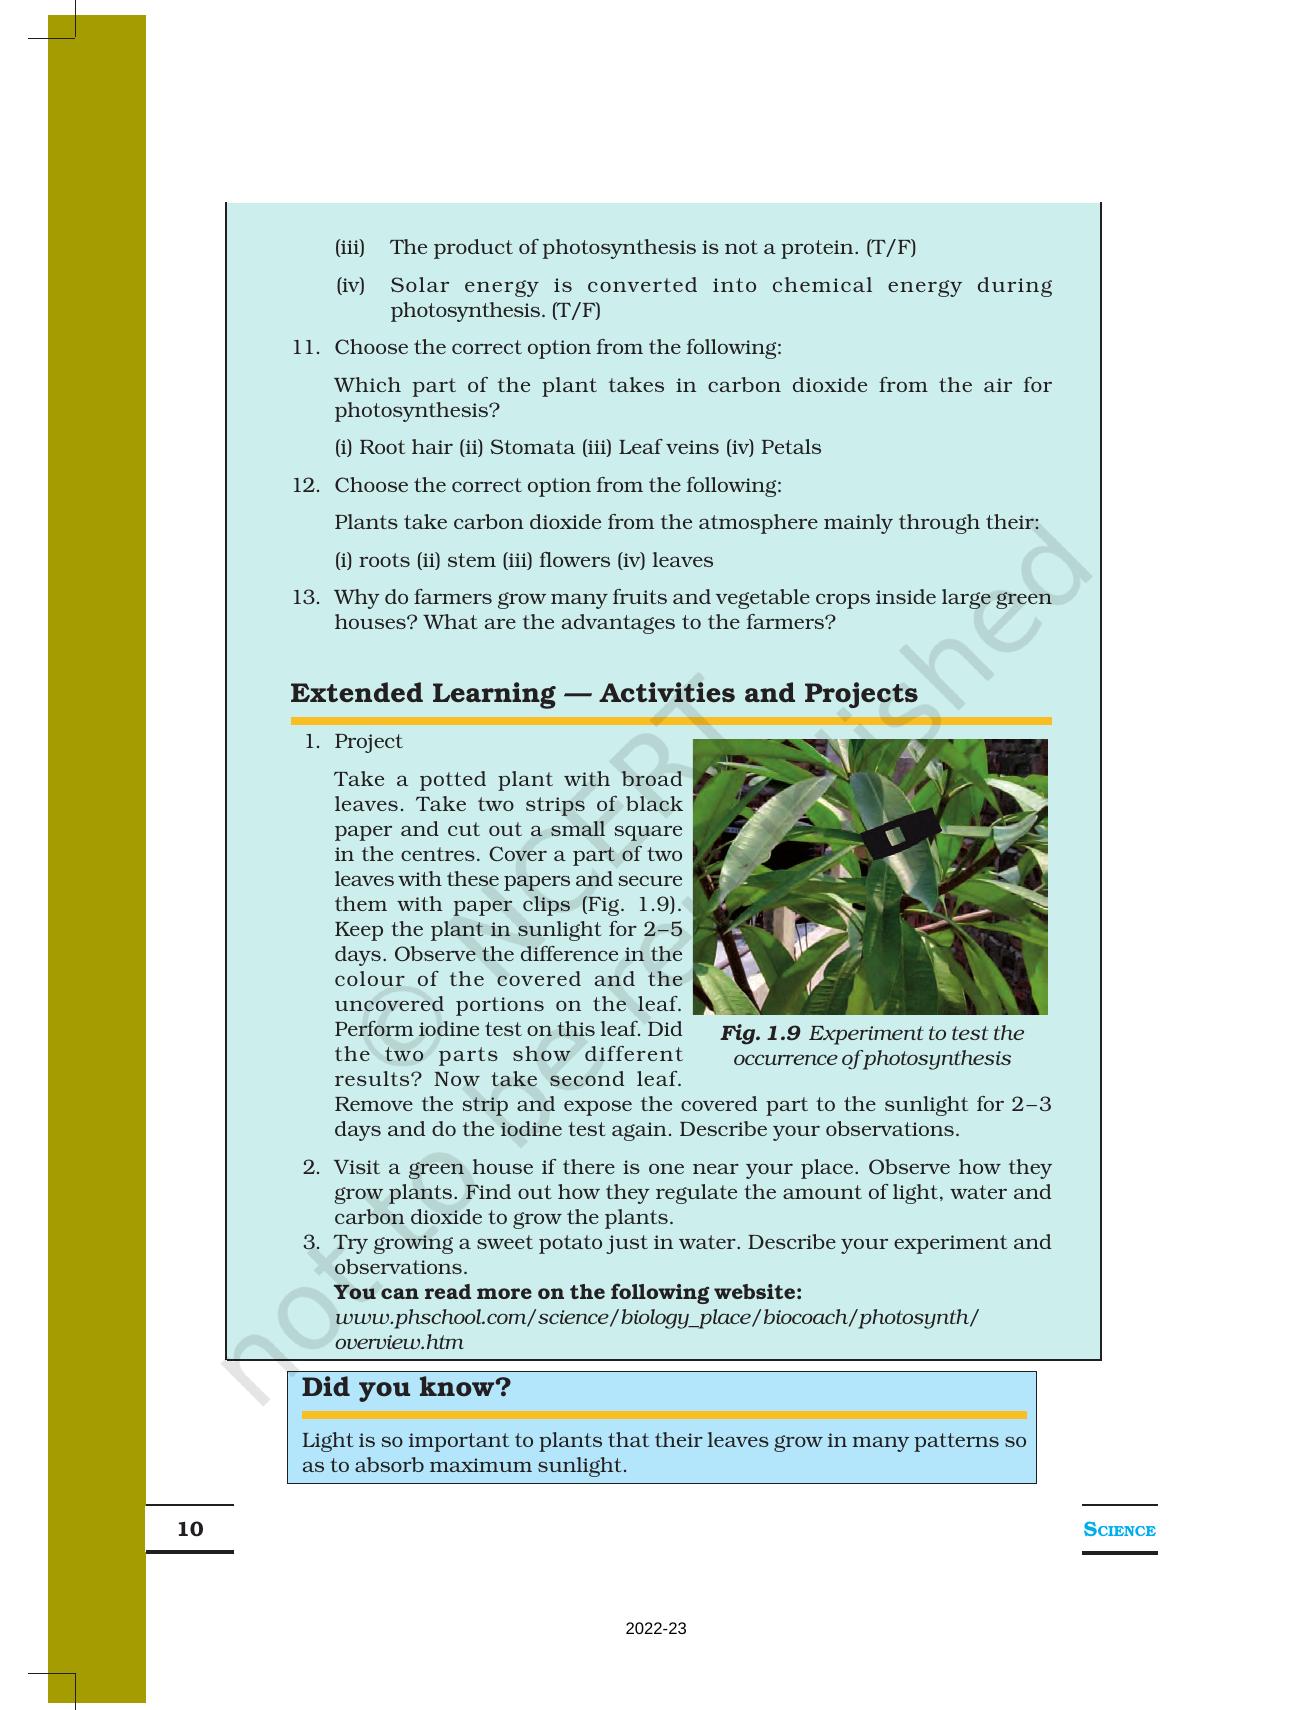 NCERT Book for Class 7 Science: Chapter 1-Nutrition in Plants - Page 10